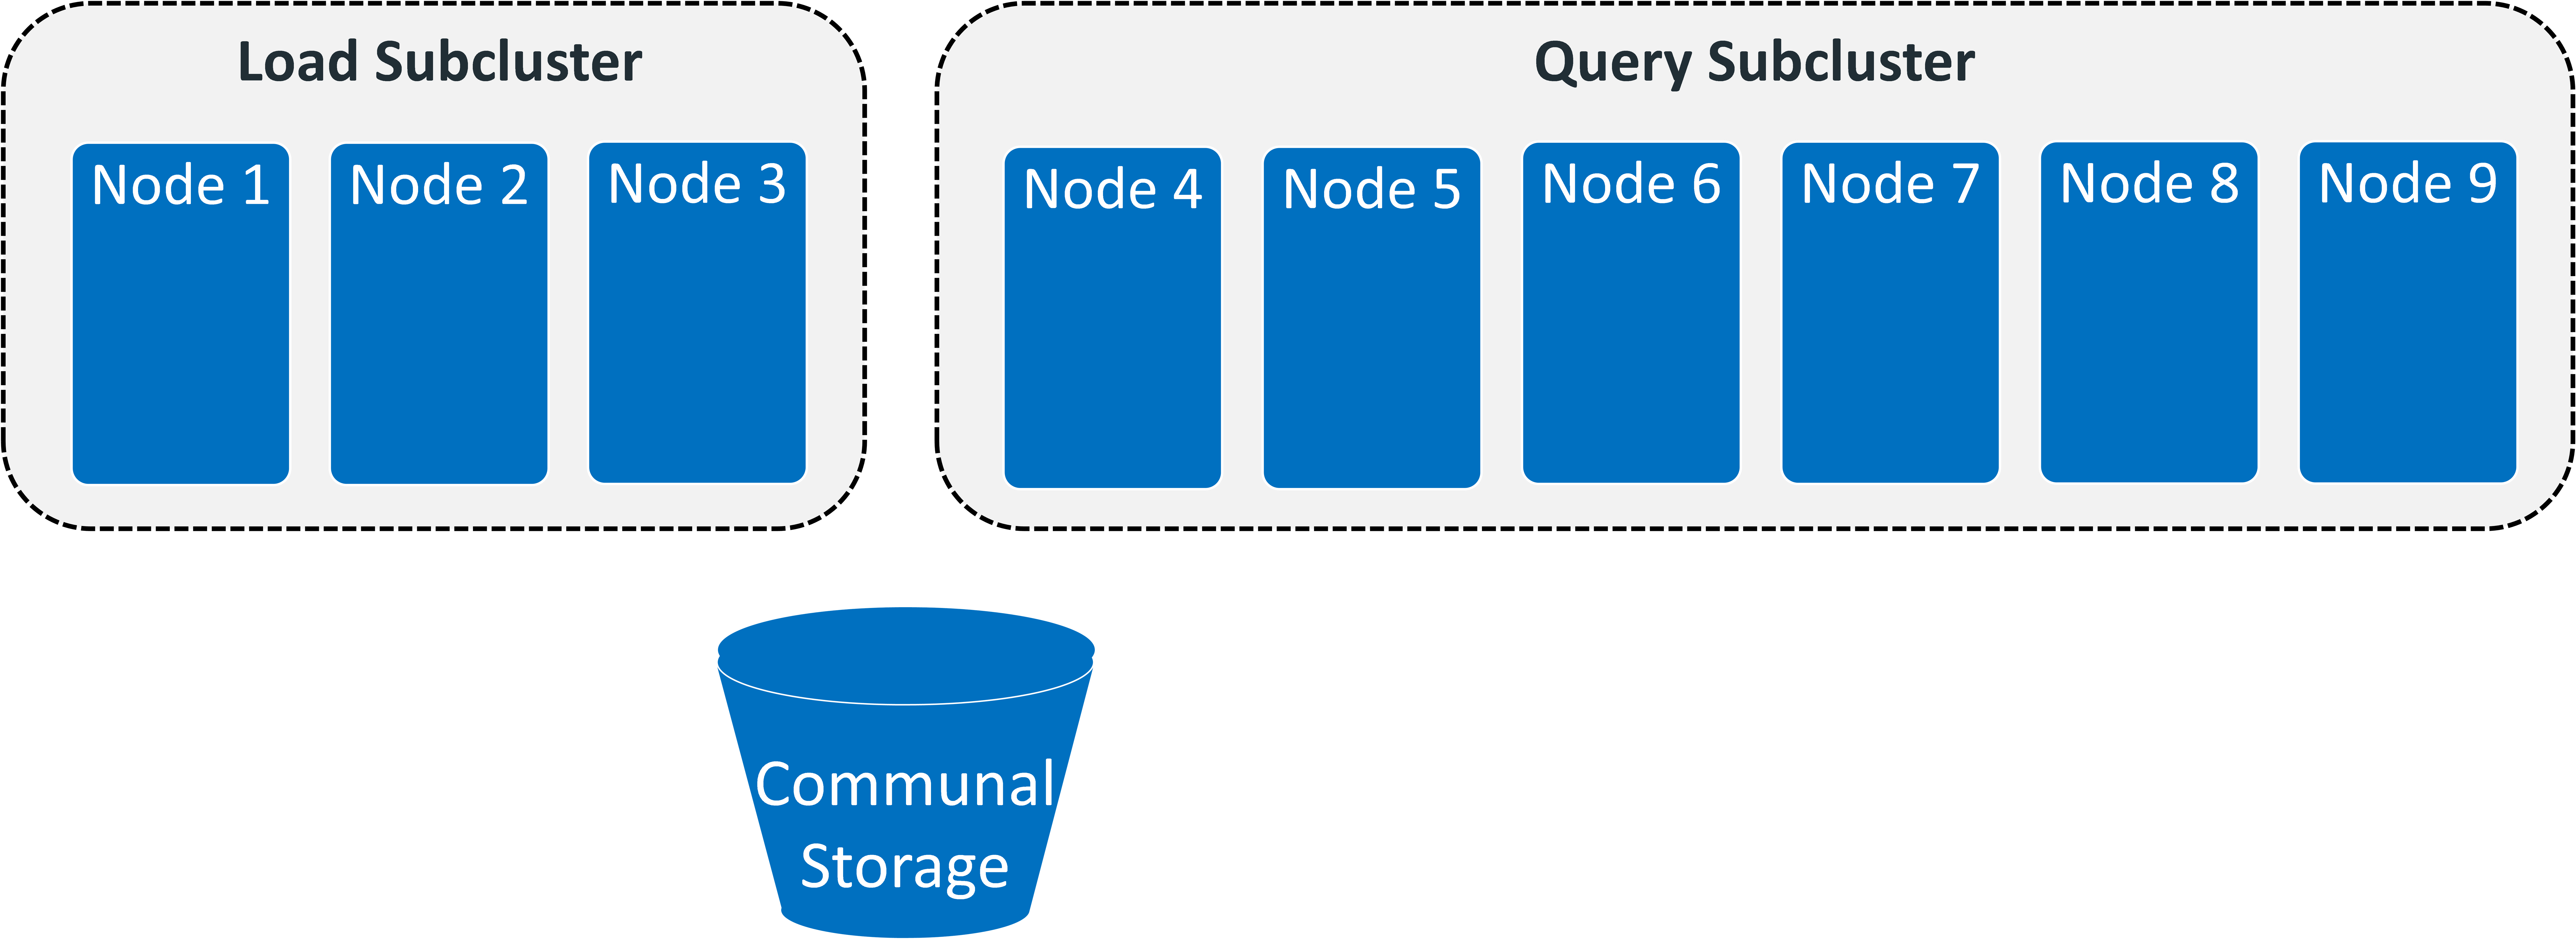 Image showing two subclusters, one labelled "Load Subcluster" contains nodes 1 through 3. The other, named "Query Subcluster" contains nodes 4 through 8. 